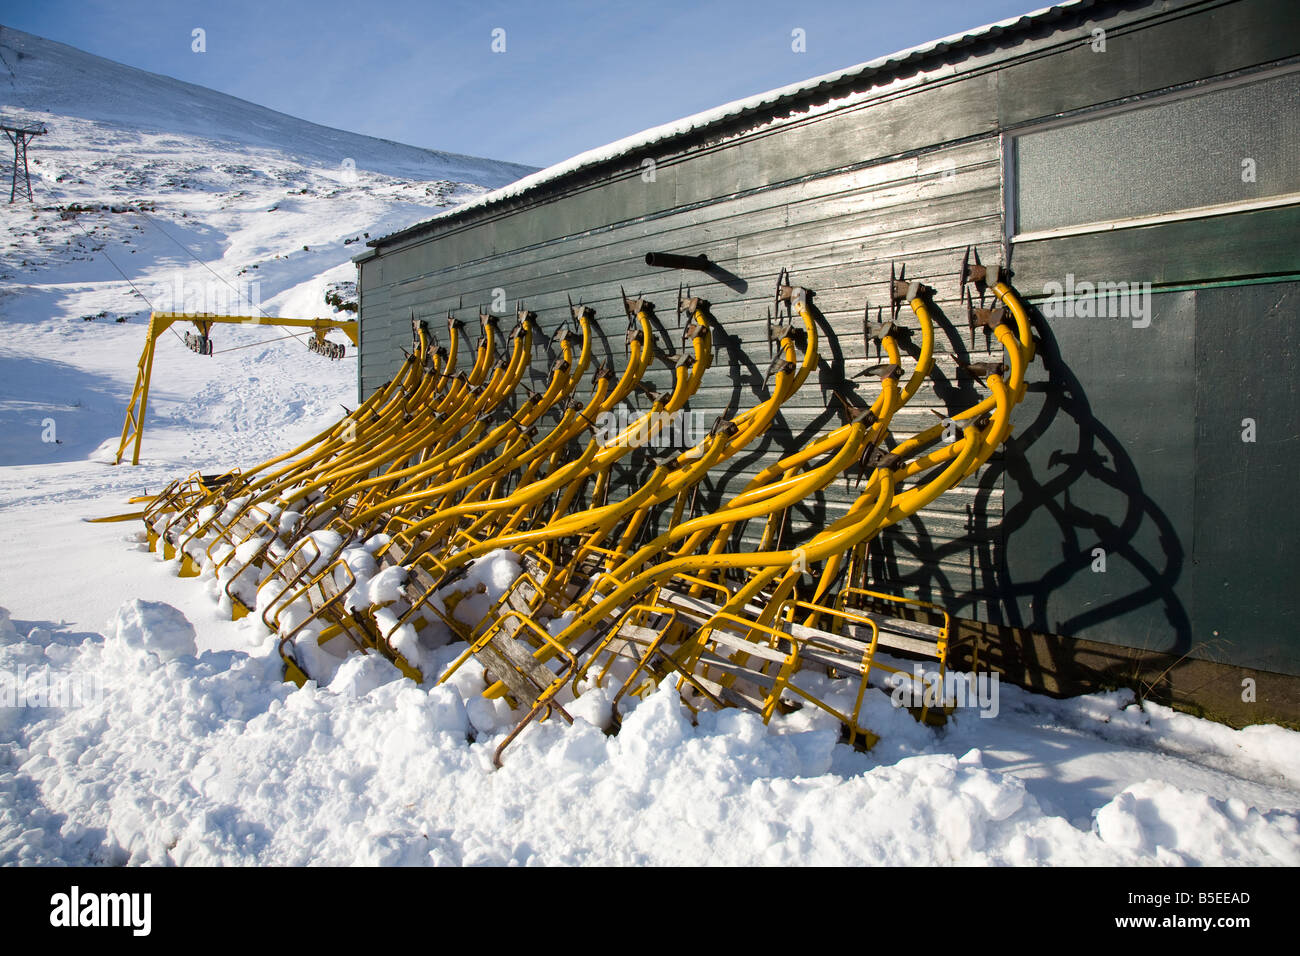 Chair lift chairs removed for service &maintenance, Glenshee Ski Area in winter snow, Cairngorms or Cairngorm National Park, Braemar, Aberdeenshire Stock Photo